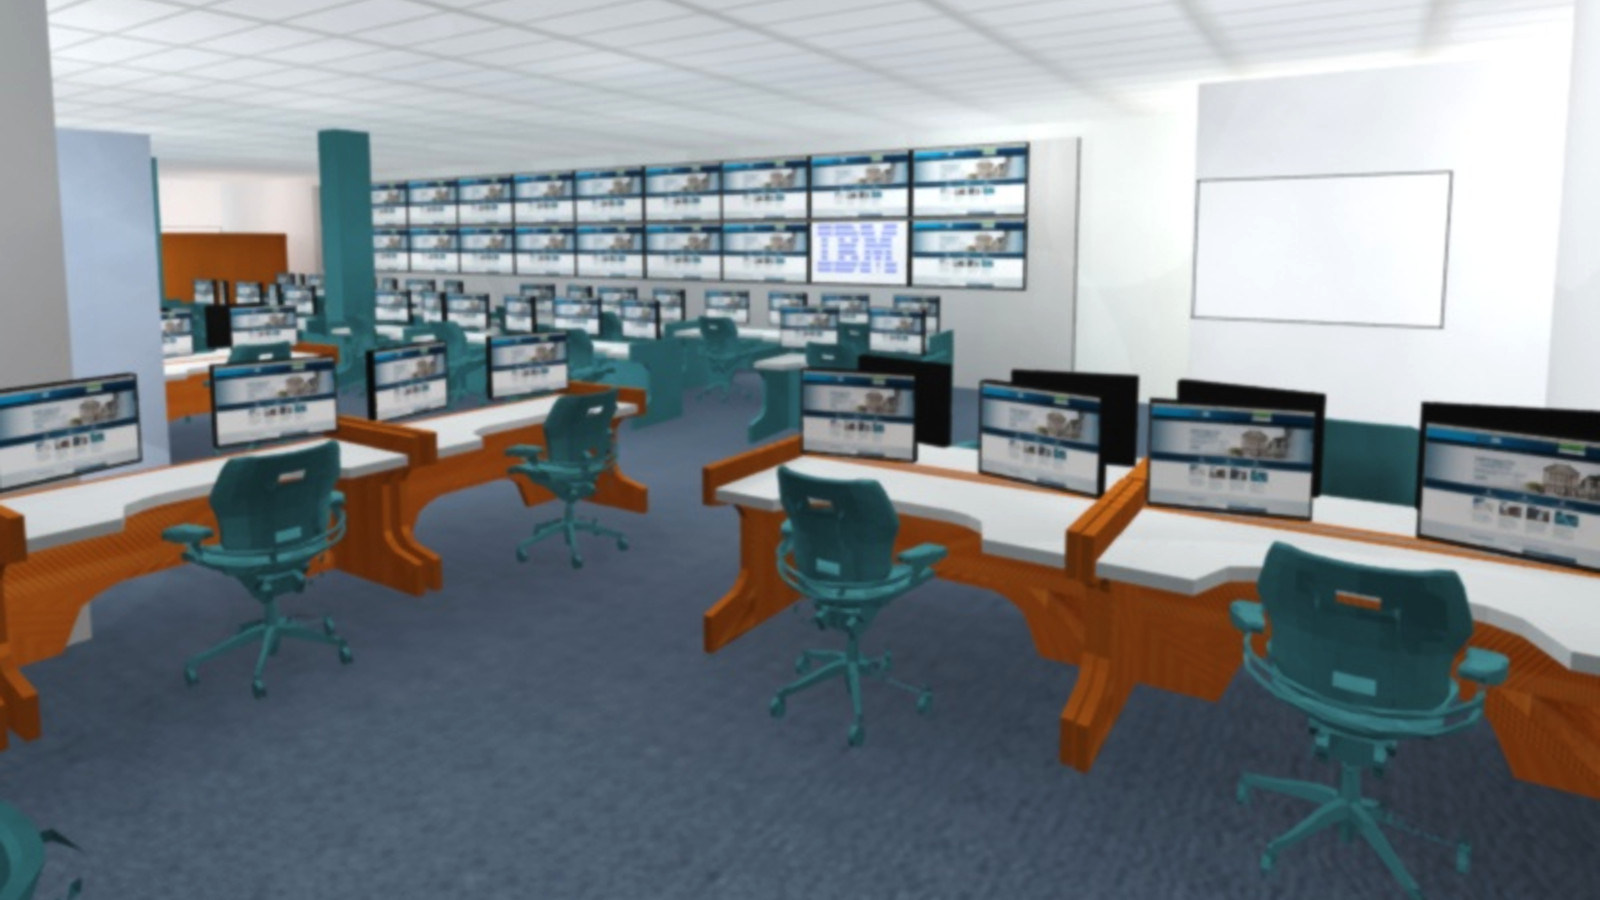 Multiple operator workstations are depicted in perspective within an open room with several rows of flat-panel displays mounted on the far wall.